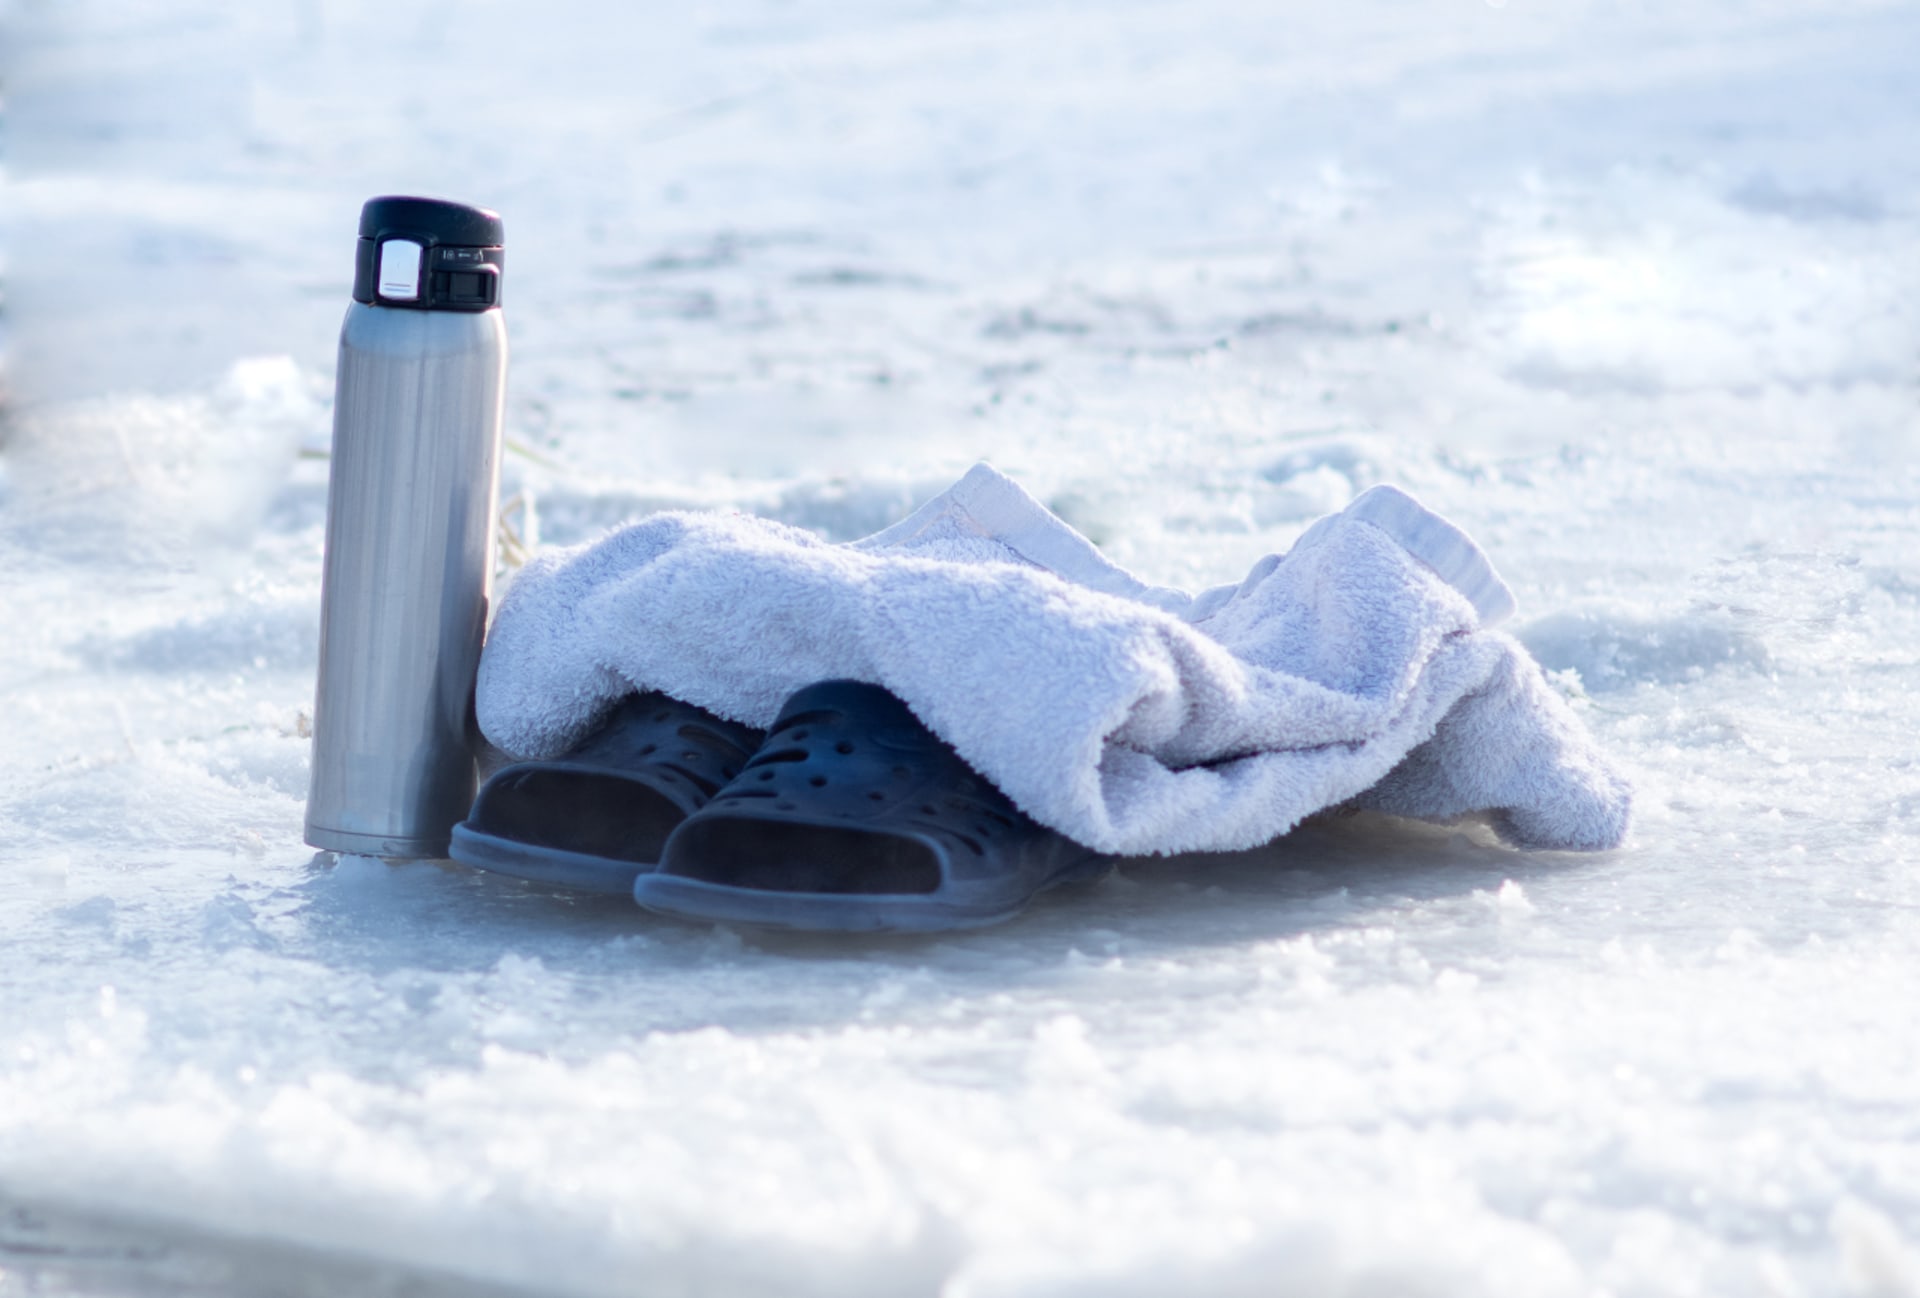 A drink, towel and flip flops at the edge of the ice